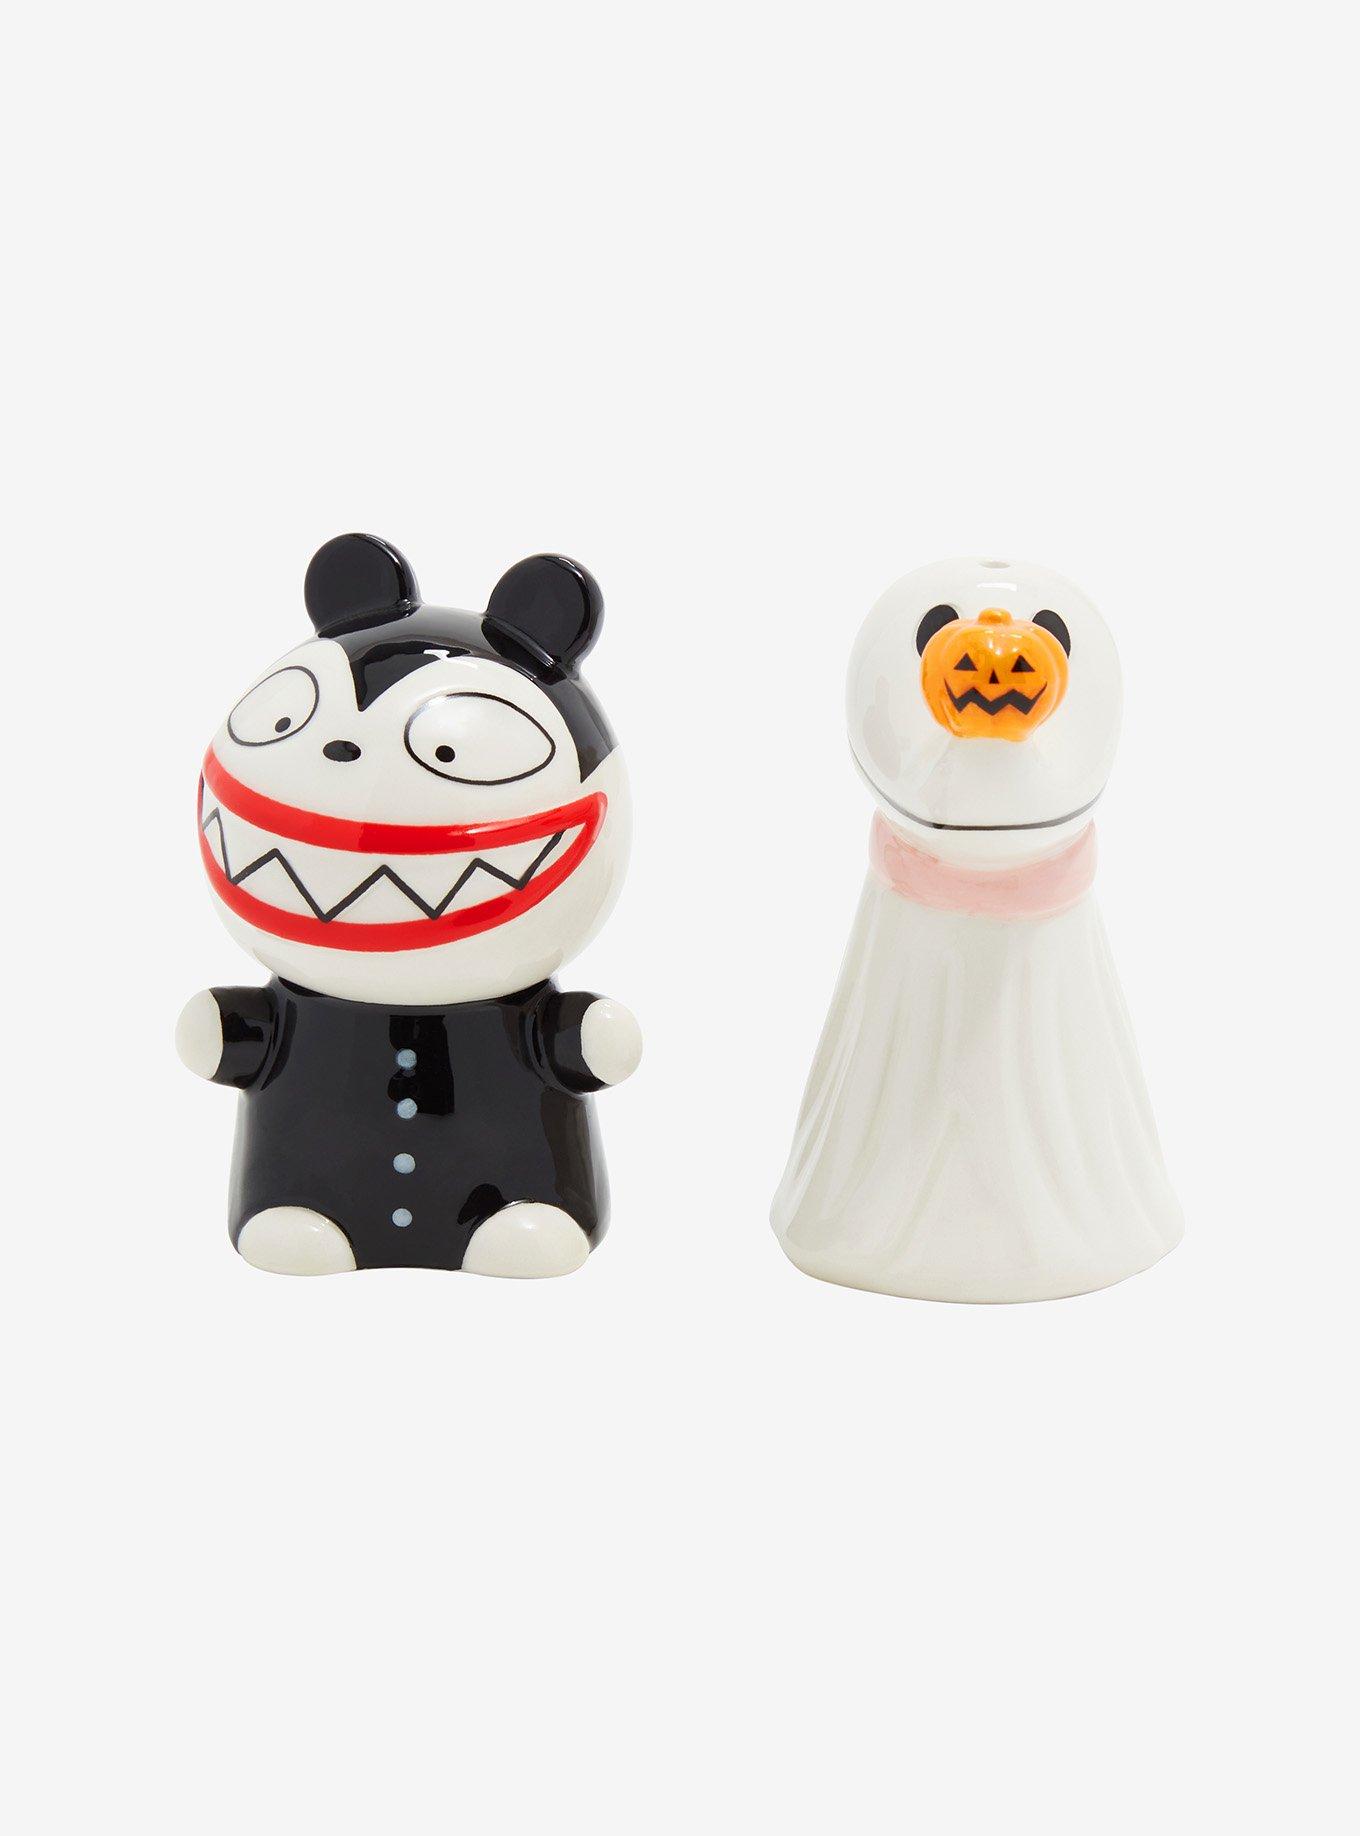 The perfect addition to your kitchen 🧂💕 Link in bio to shop our exclusive  #BluesClues Mr. Salt, Mrs. Pepper, & Paprika Shaker Set!